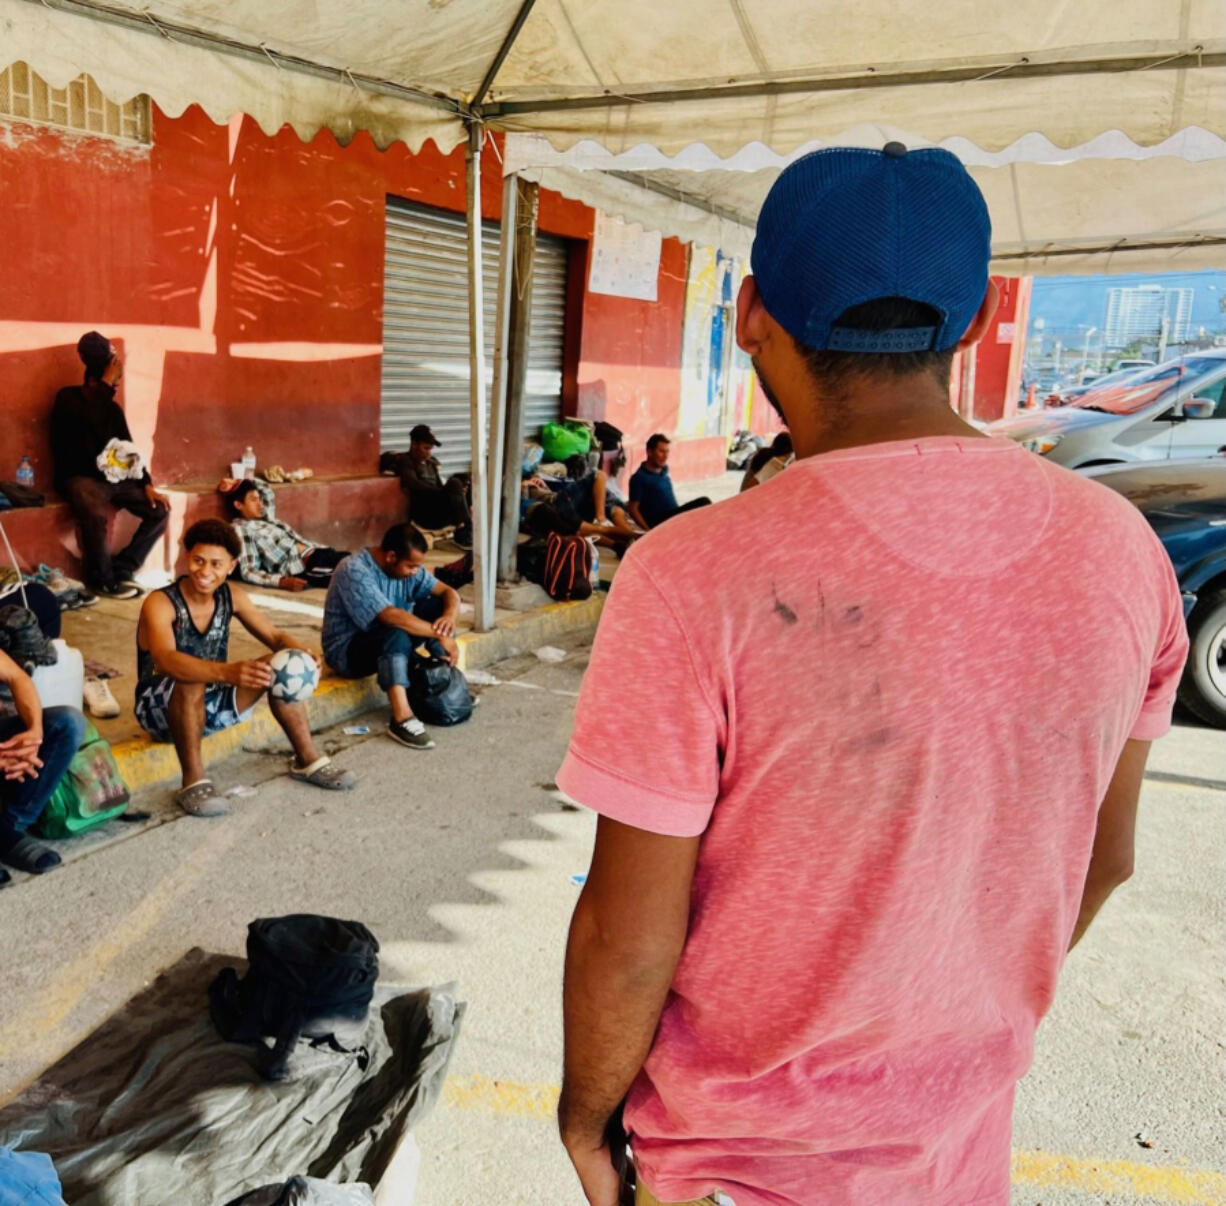 Francisco Contreras, a migrant from Guatemala, stands outside Casa Indi, a sprawling migrant shelter in the industrial city of Monterrey, Mexico. He works day jobs as he raises money to cross into Texas, he hopes.